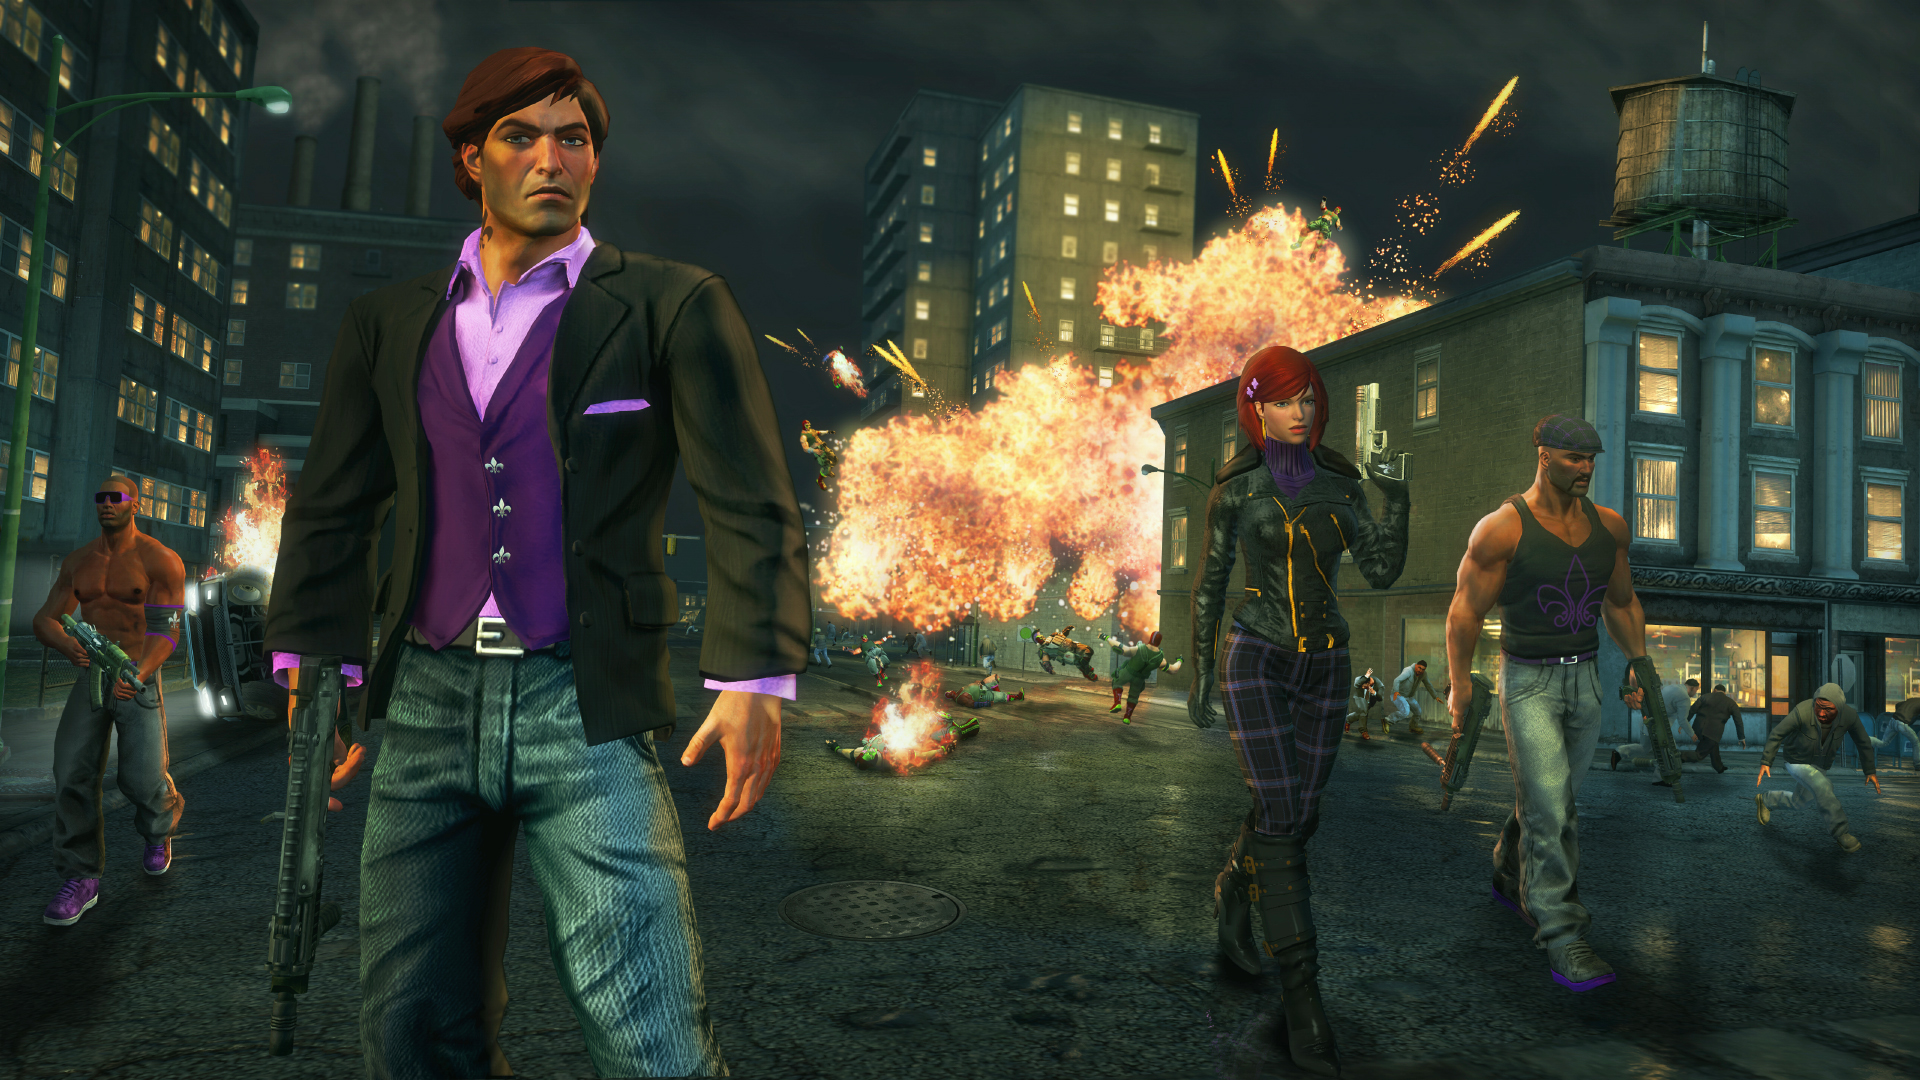 Northern Distraktion Blinke Saints Row: The Third - The Full Package on Nintendo Switch - Deep Silver